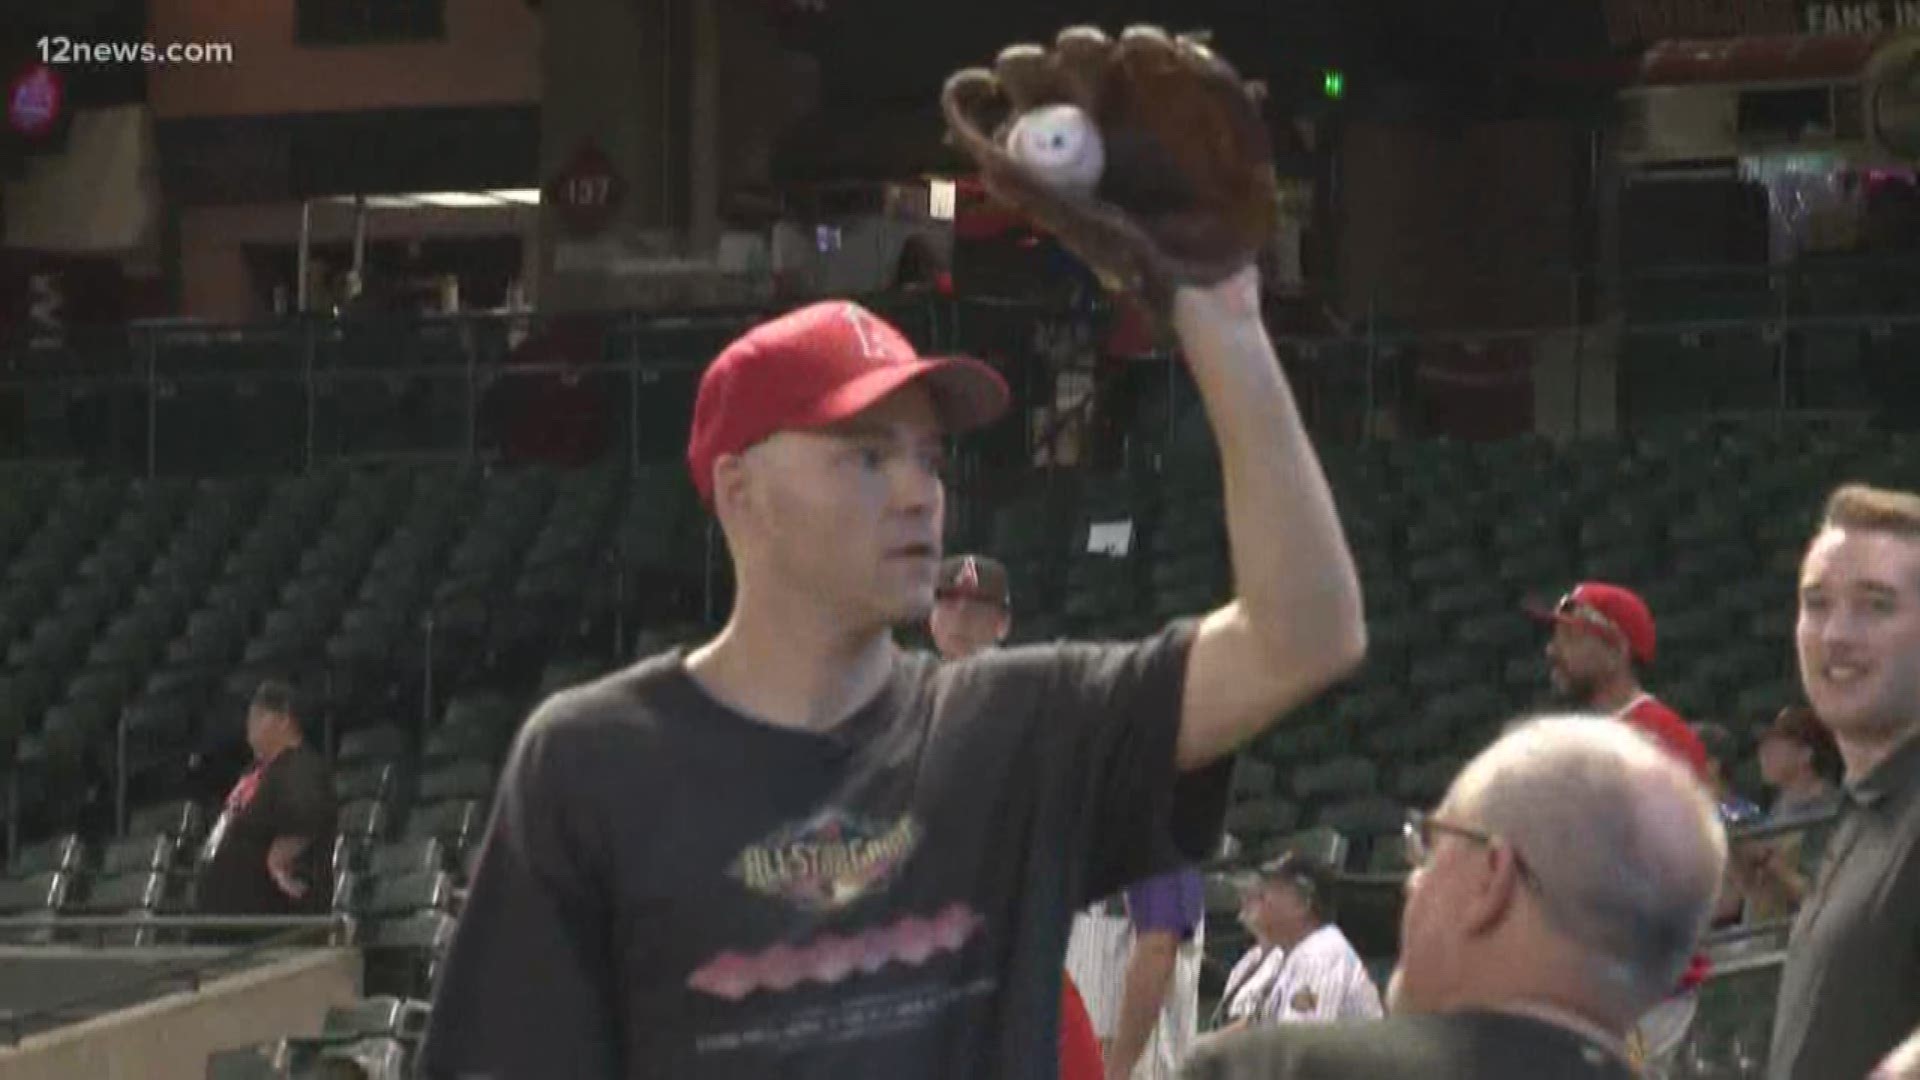 Zack Hample is a little obsessed with baseball. Okay, a lot obsessed! He has over 10,000 baseballs he's caught at games across the country. Hample shows Ryan Cody how to catch as many as you can while enjoying America's past time.